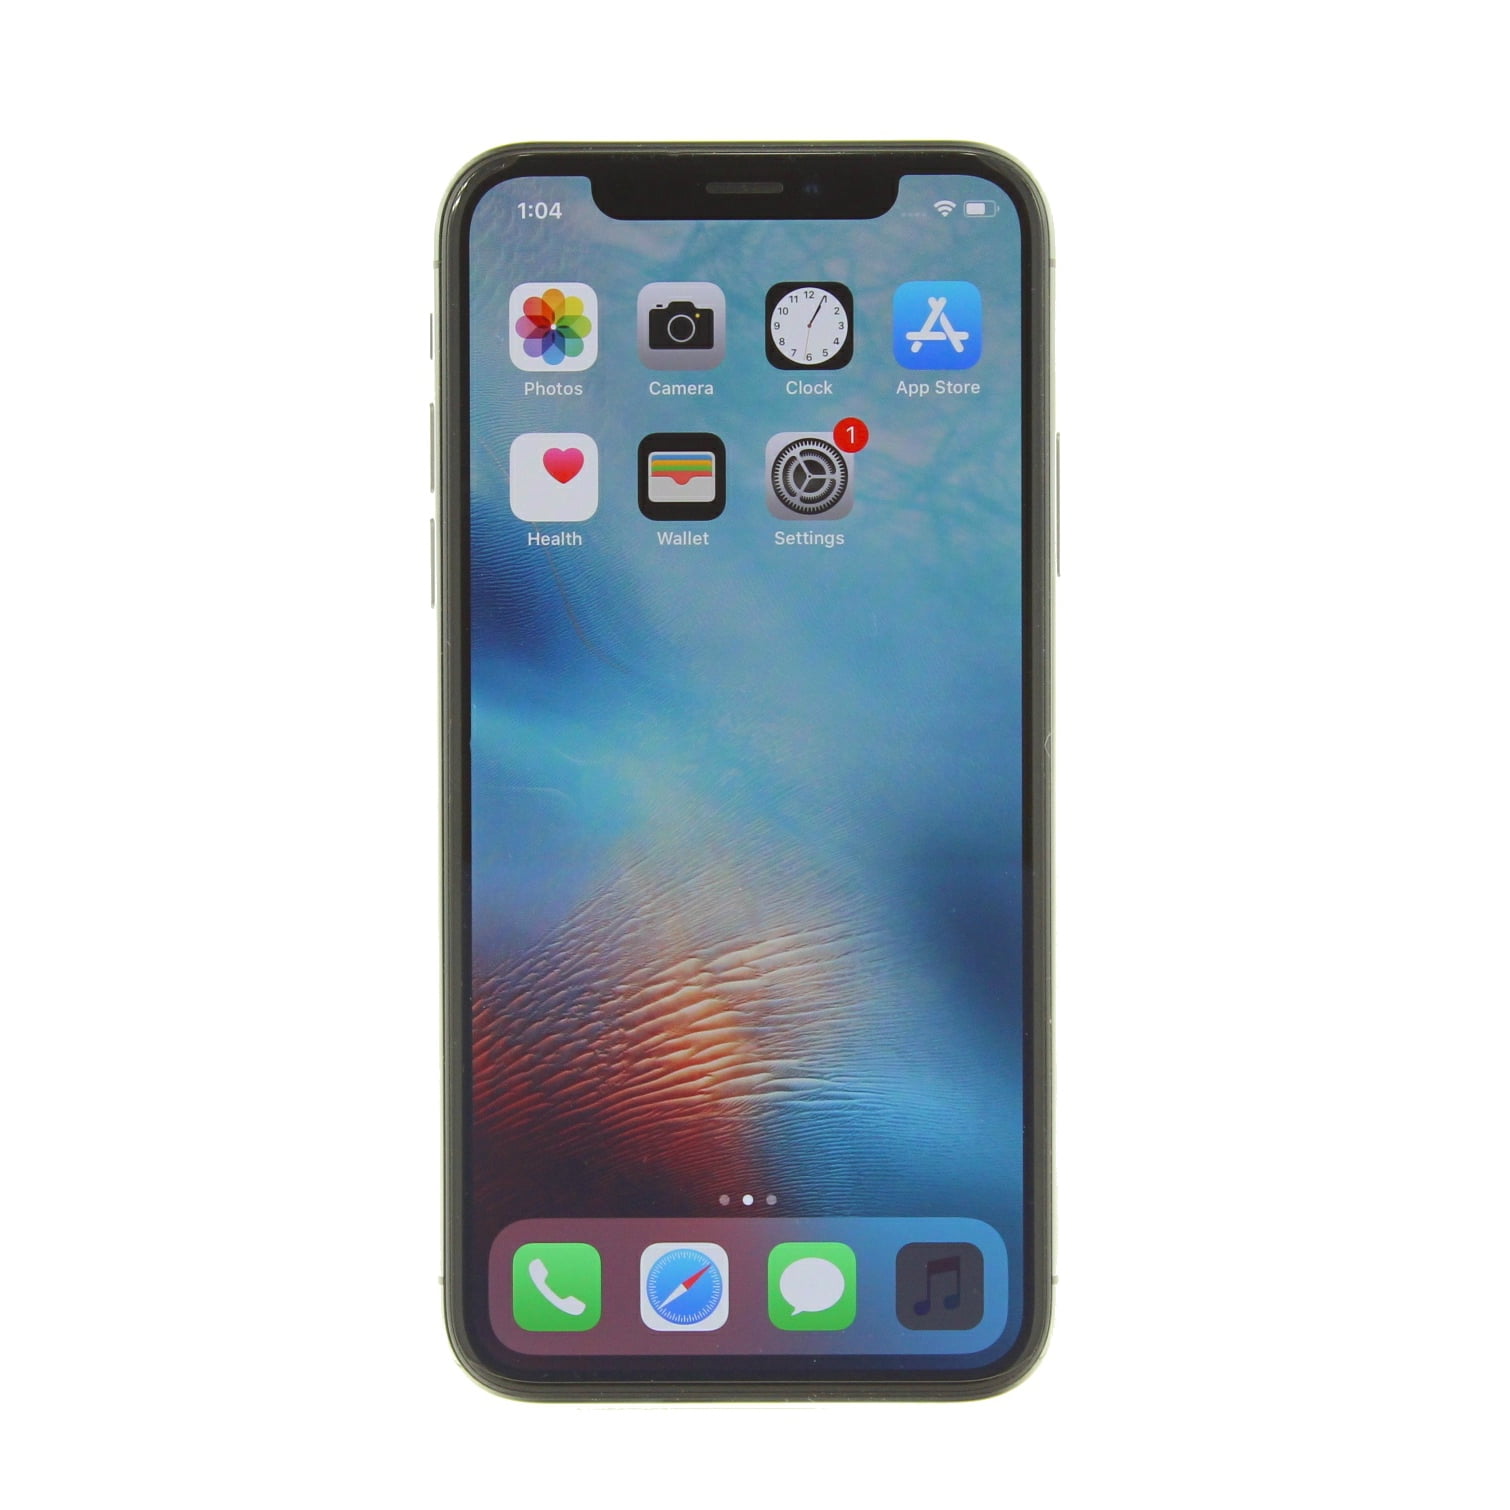 Apple iPhone X Silver 256gb Unlocked Smartphone for sale online 